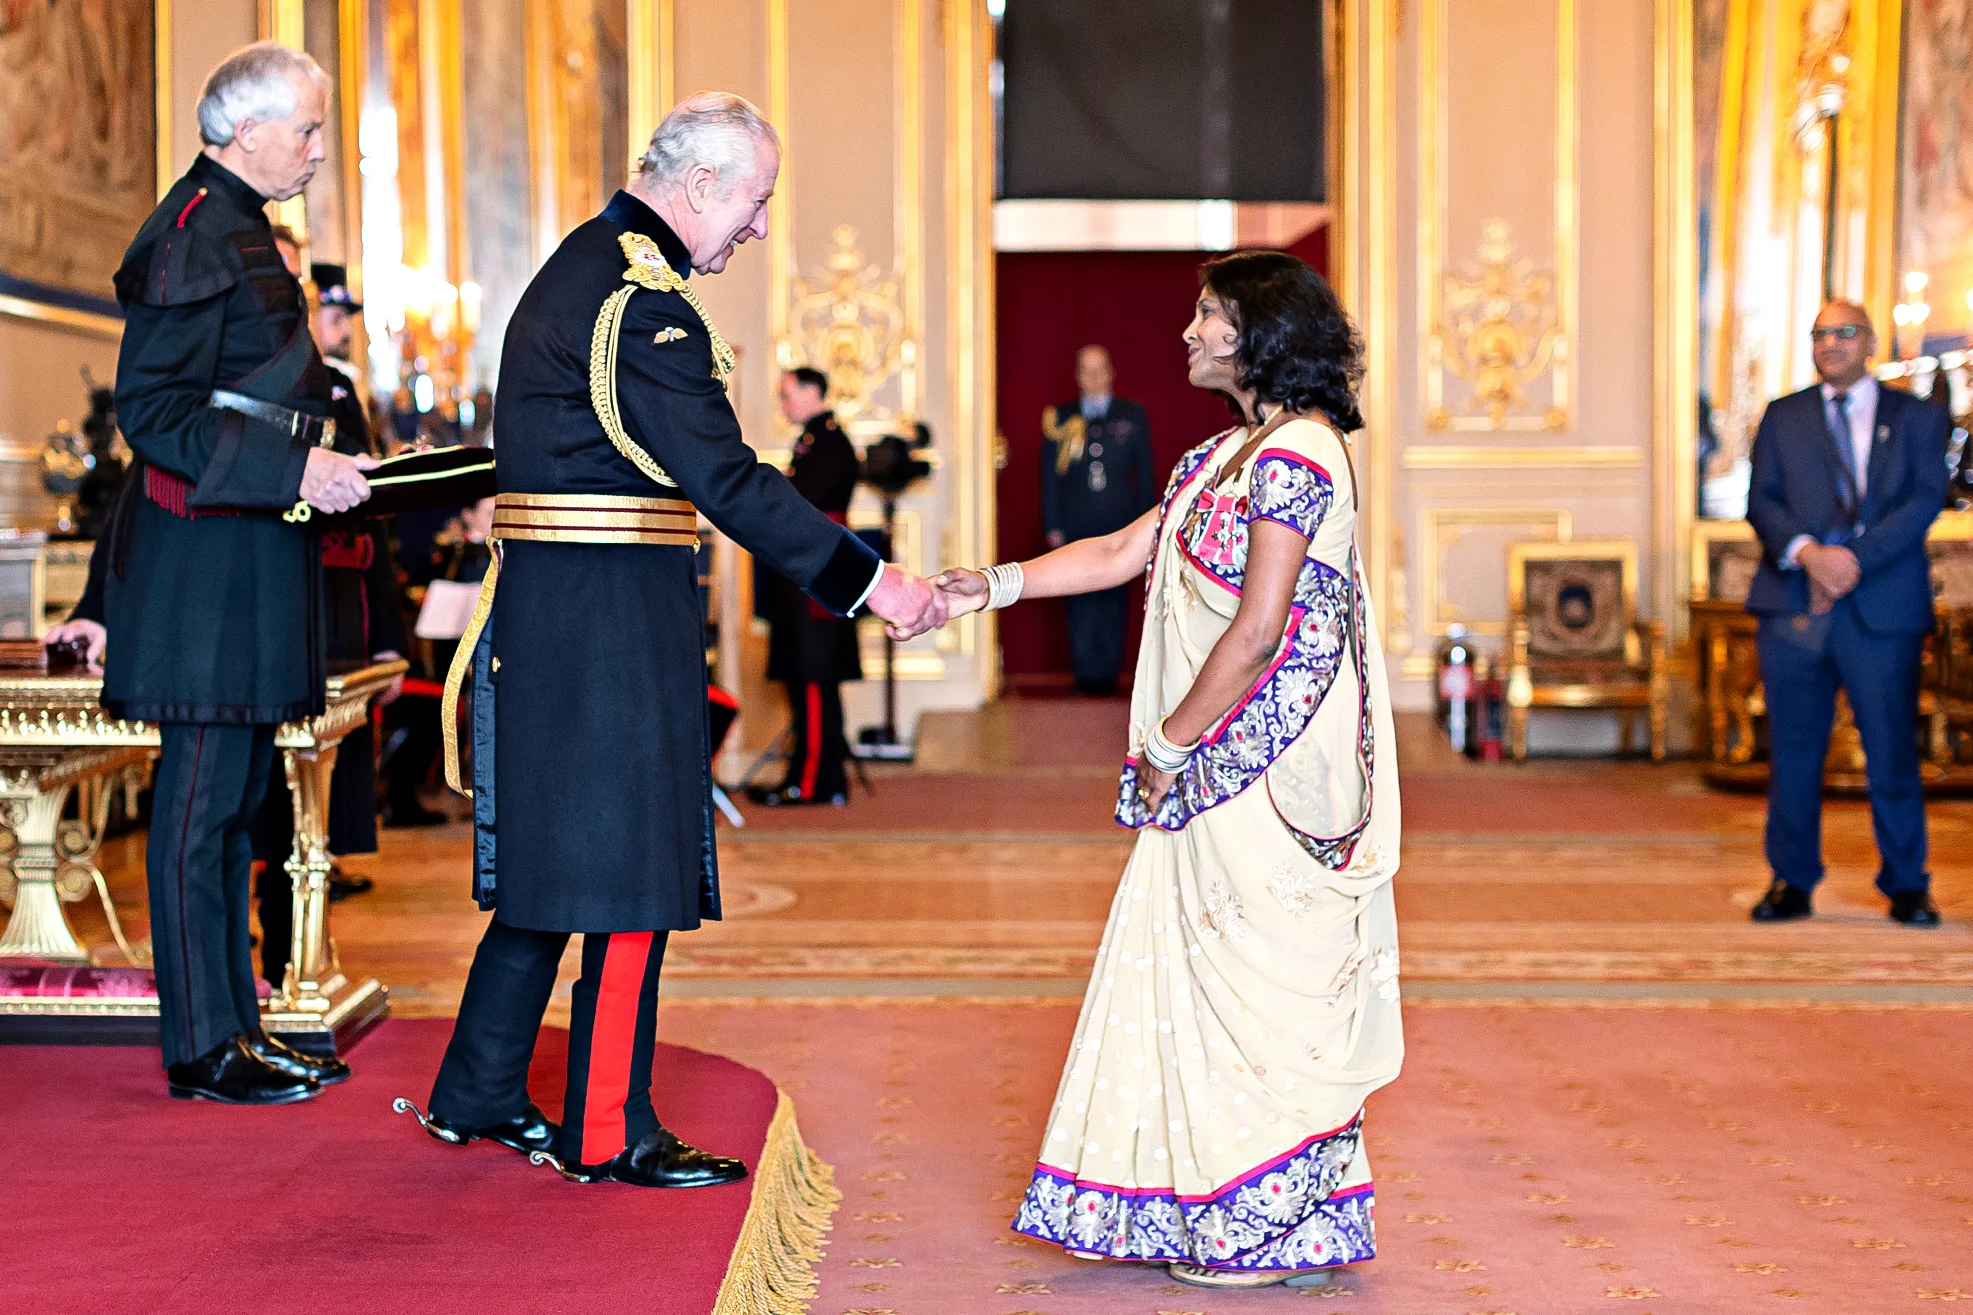 Miss Jyoti Shah MBE attending the investiture at Buckingham Palace with King Charles. She was honoured in the New Year’s Honours list 2022.